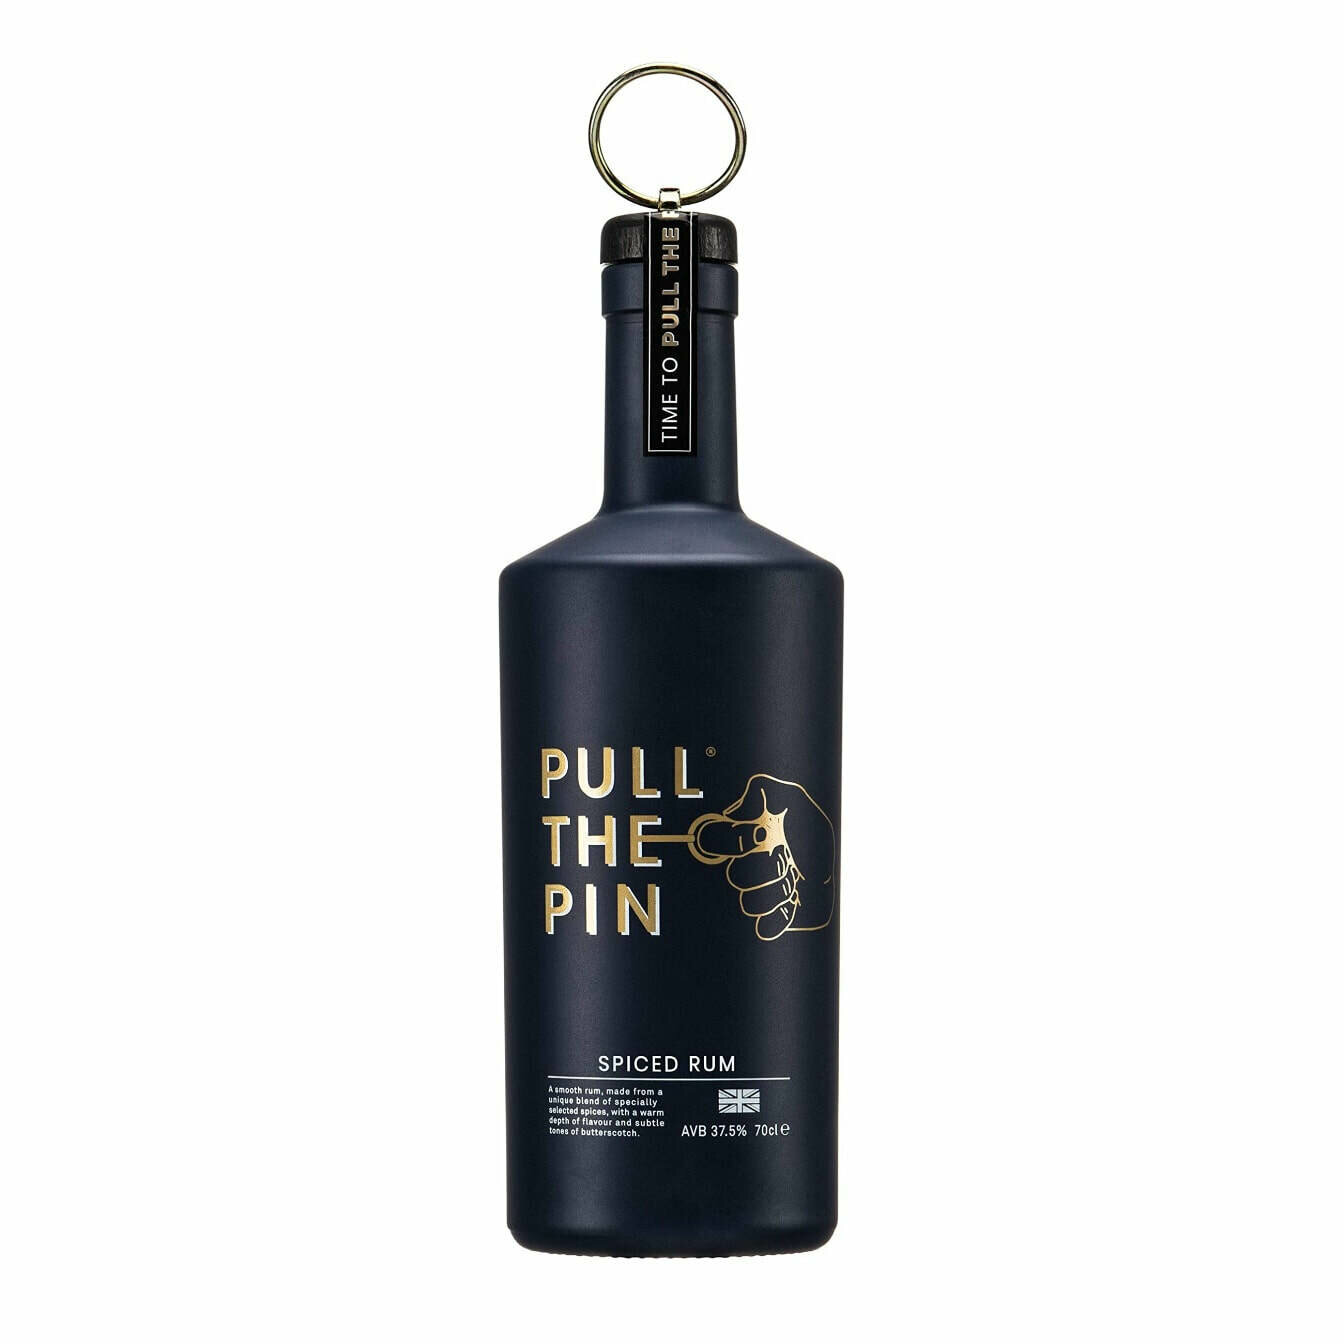 Pull The Pin Spiced Rum